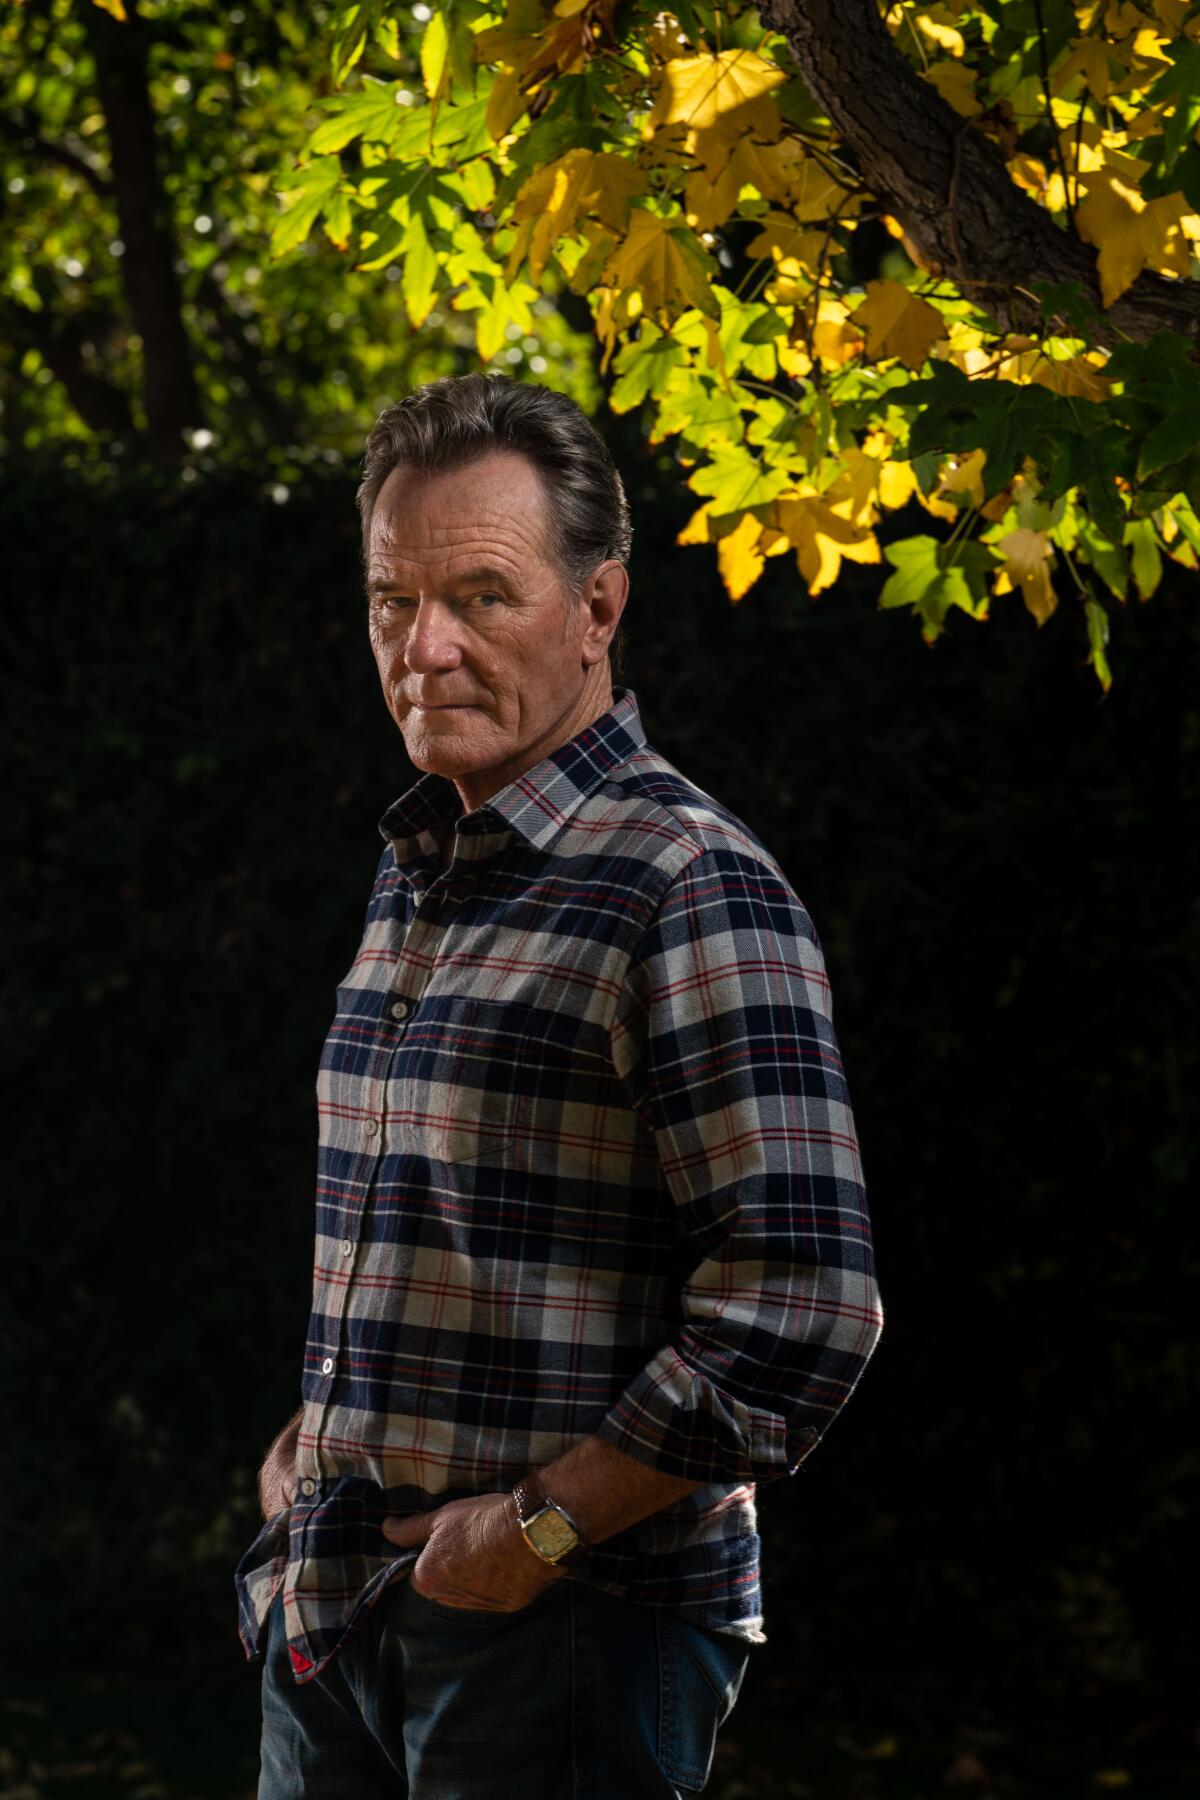 Bryan Cranston poses for a portrait beneath the leaves of a tree.